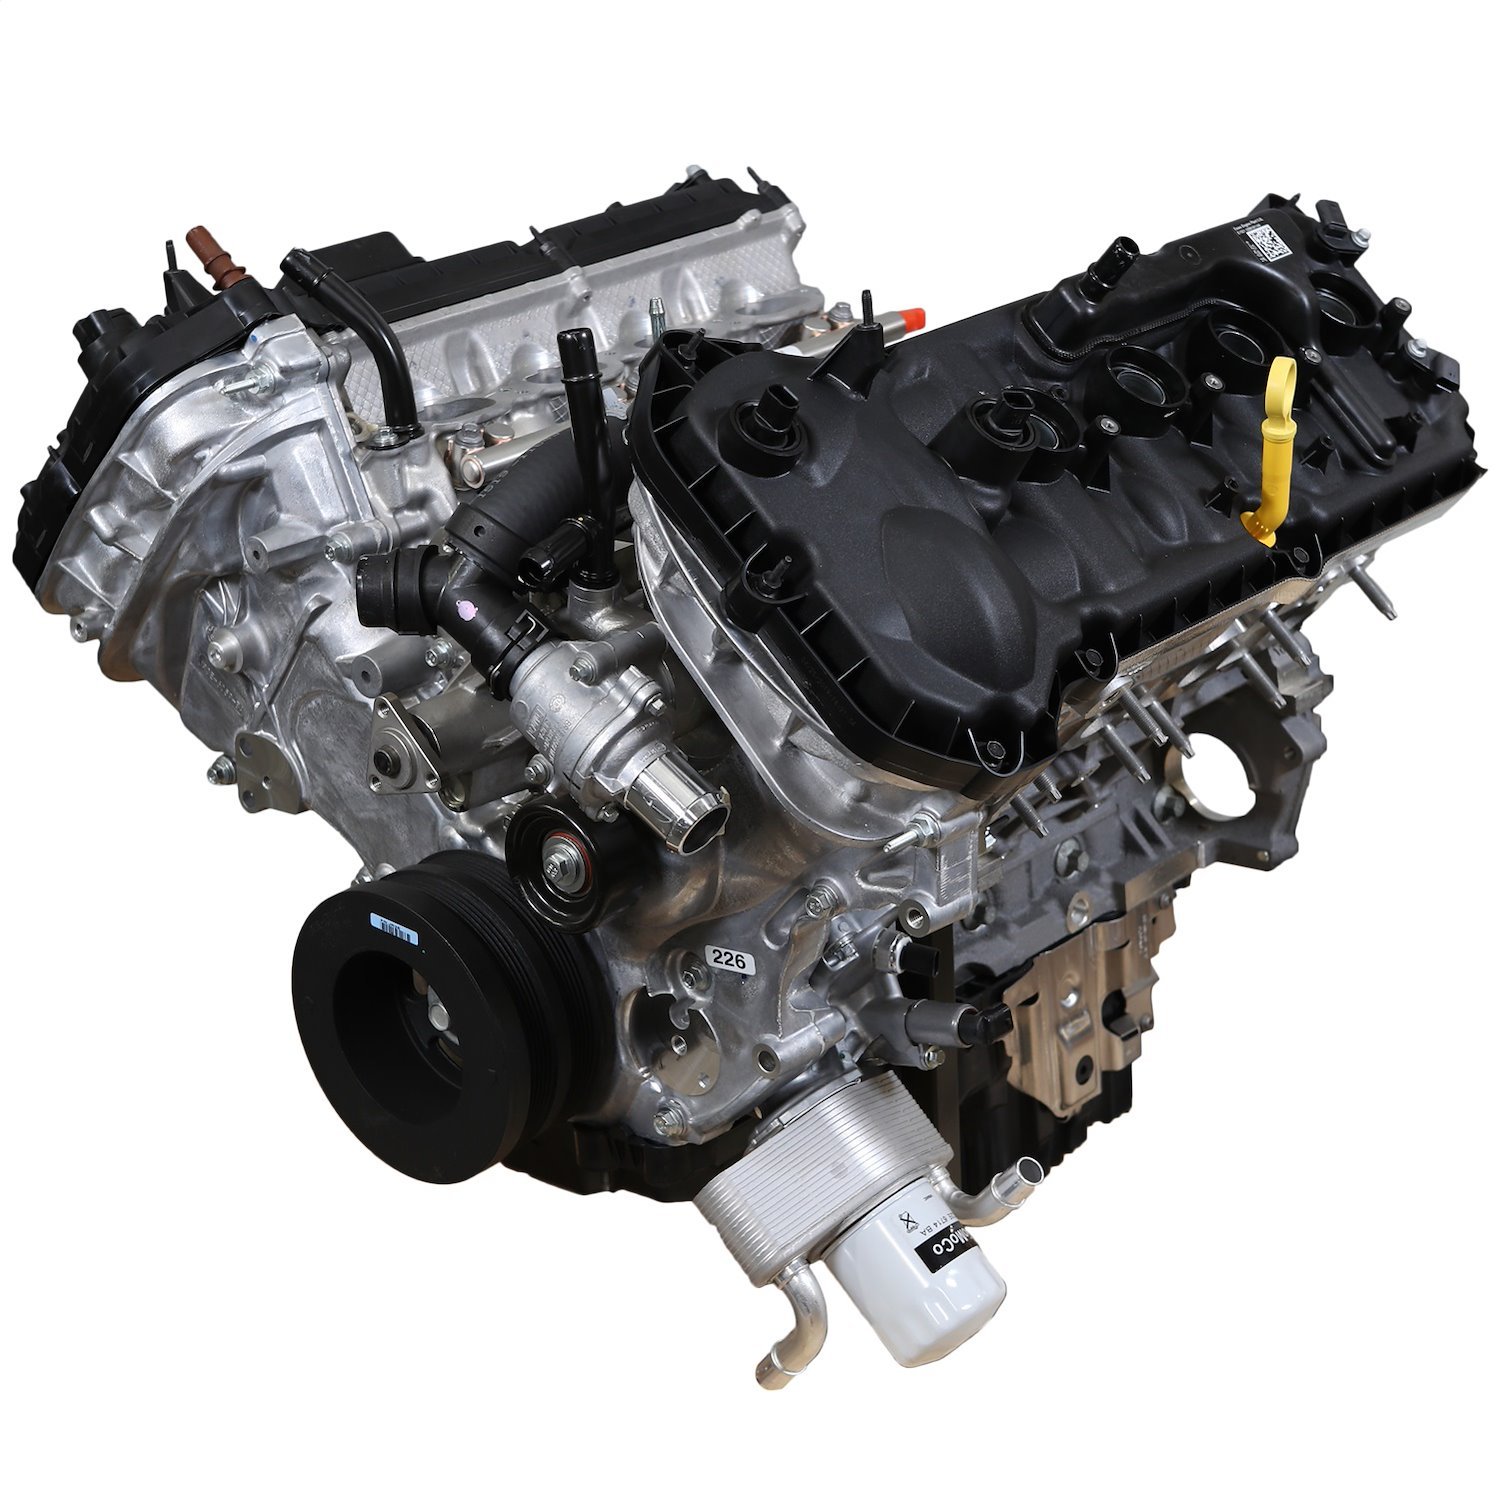 M-6006-M50C 5.0L Coyote Long Block Crate Engine for 2018-2021 Ford Mustang [460 HP]